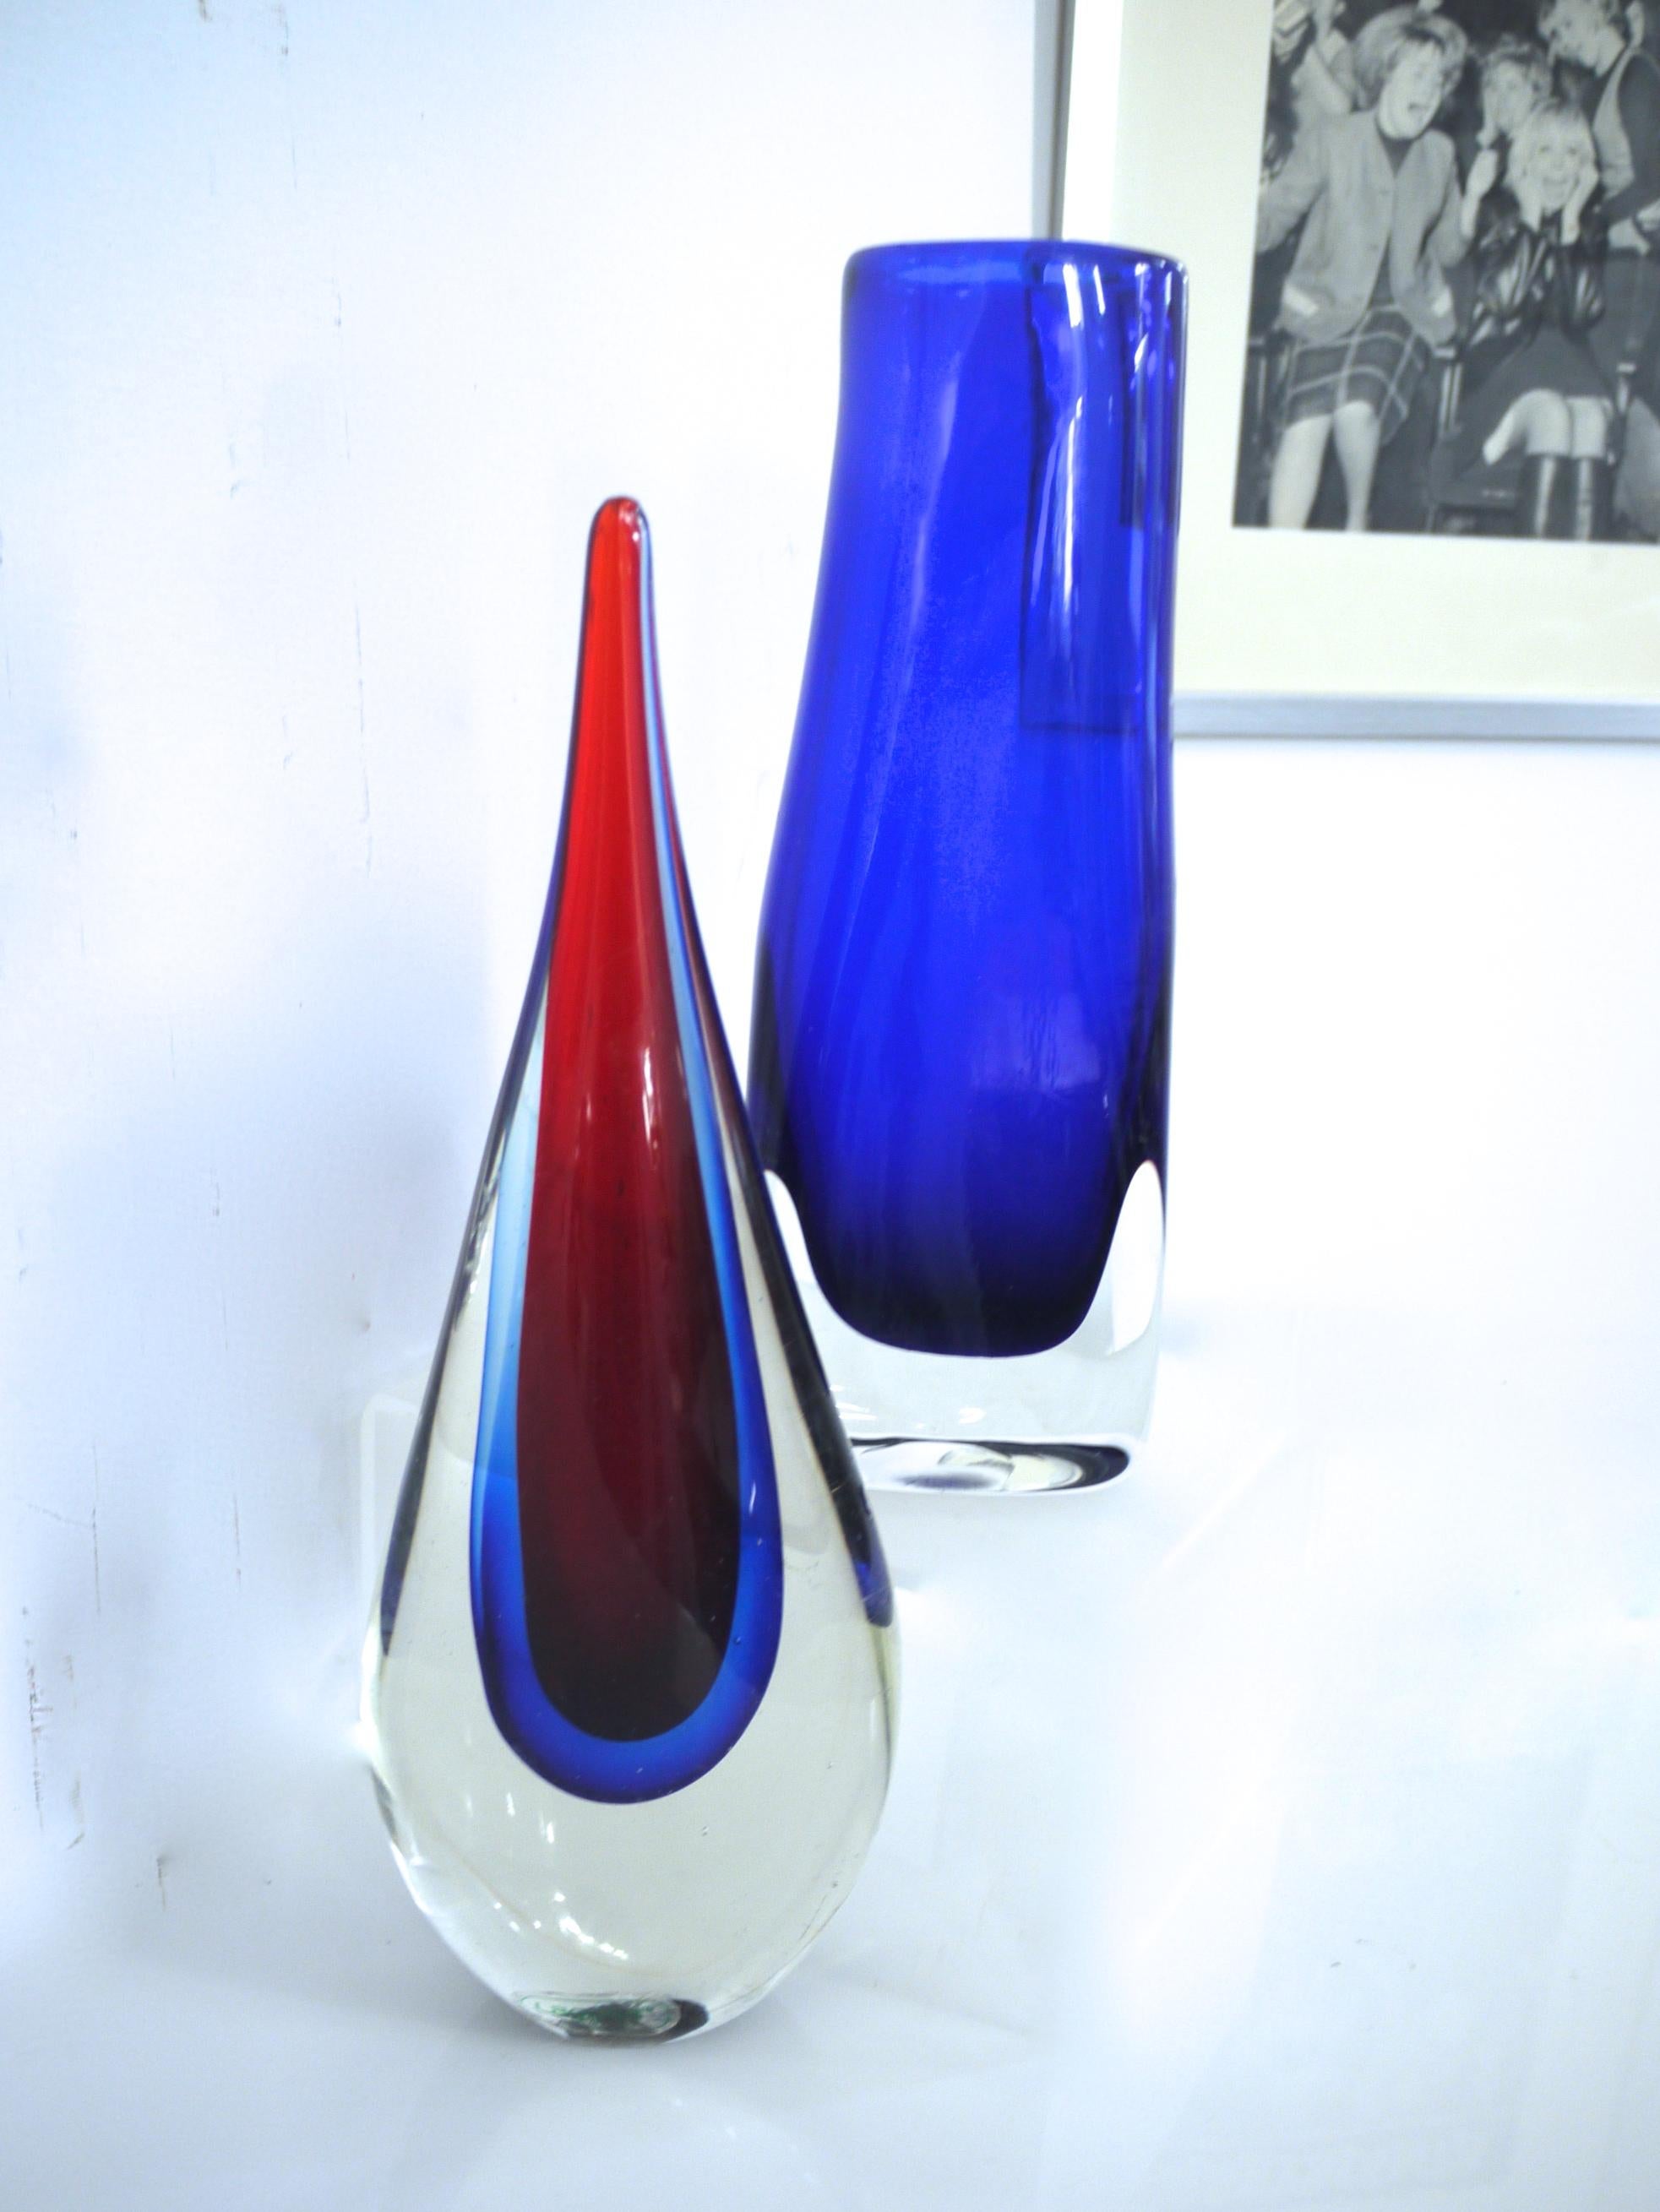 Murano Vetreria Artistica Laguna Sommerso Extra Large 'Teardrop' Poli 1970s In Good Condition For Sale In Halstead, GB